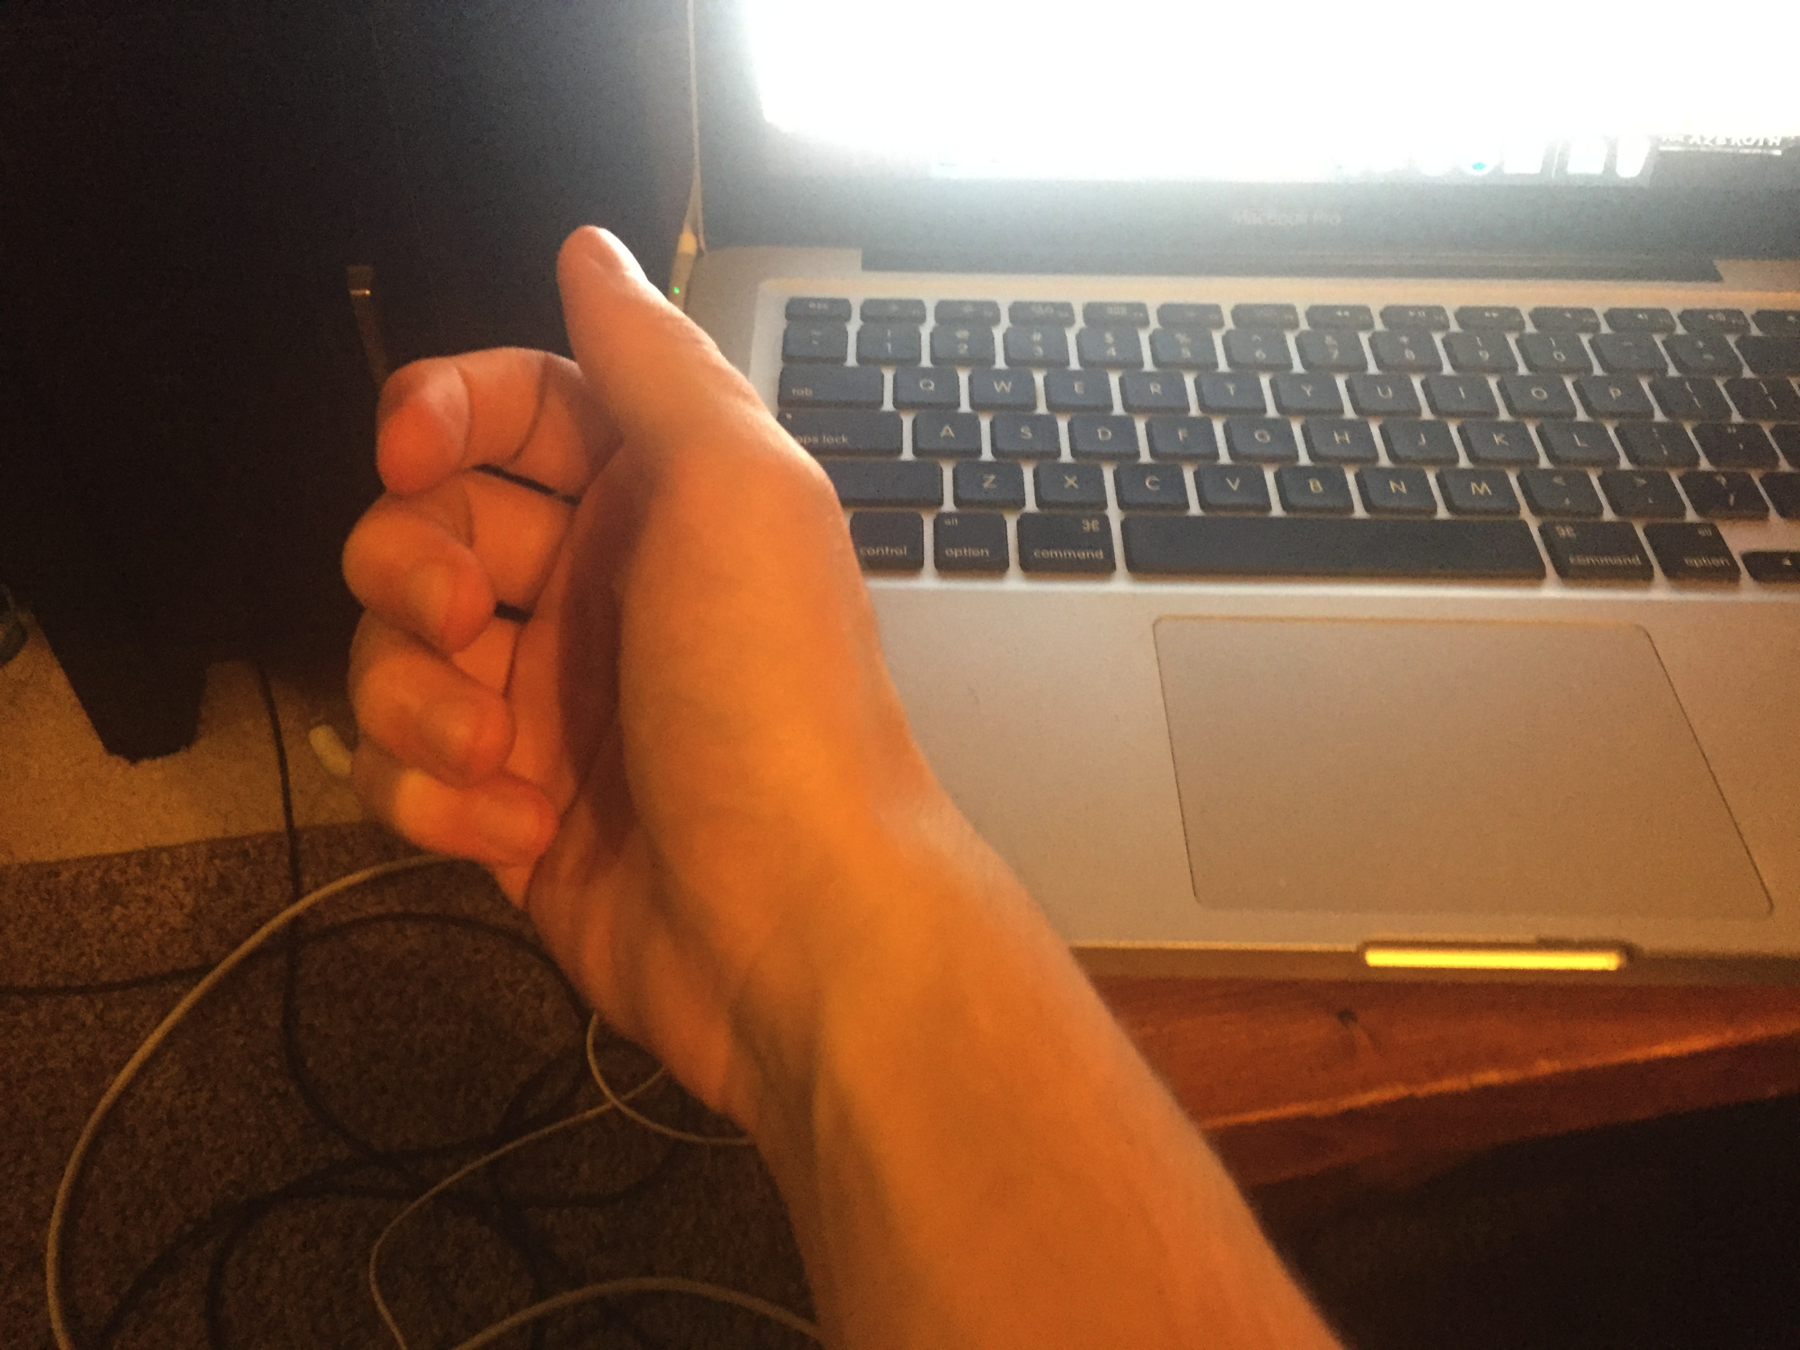 Wrist in front of a computer